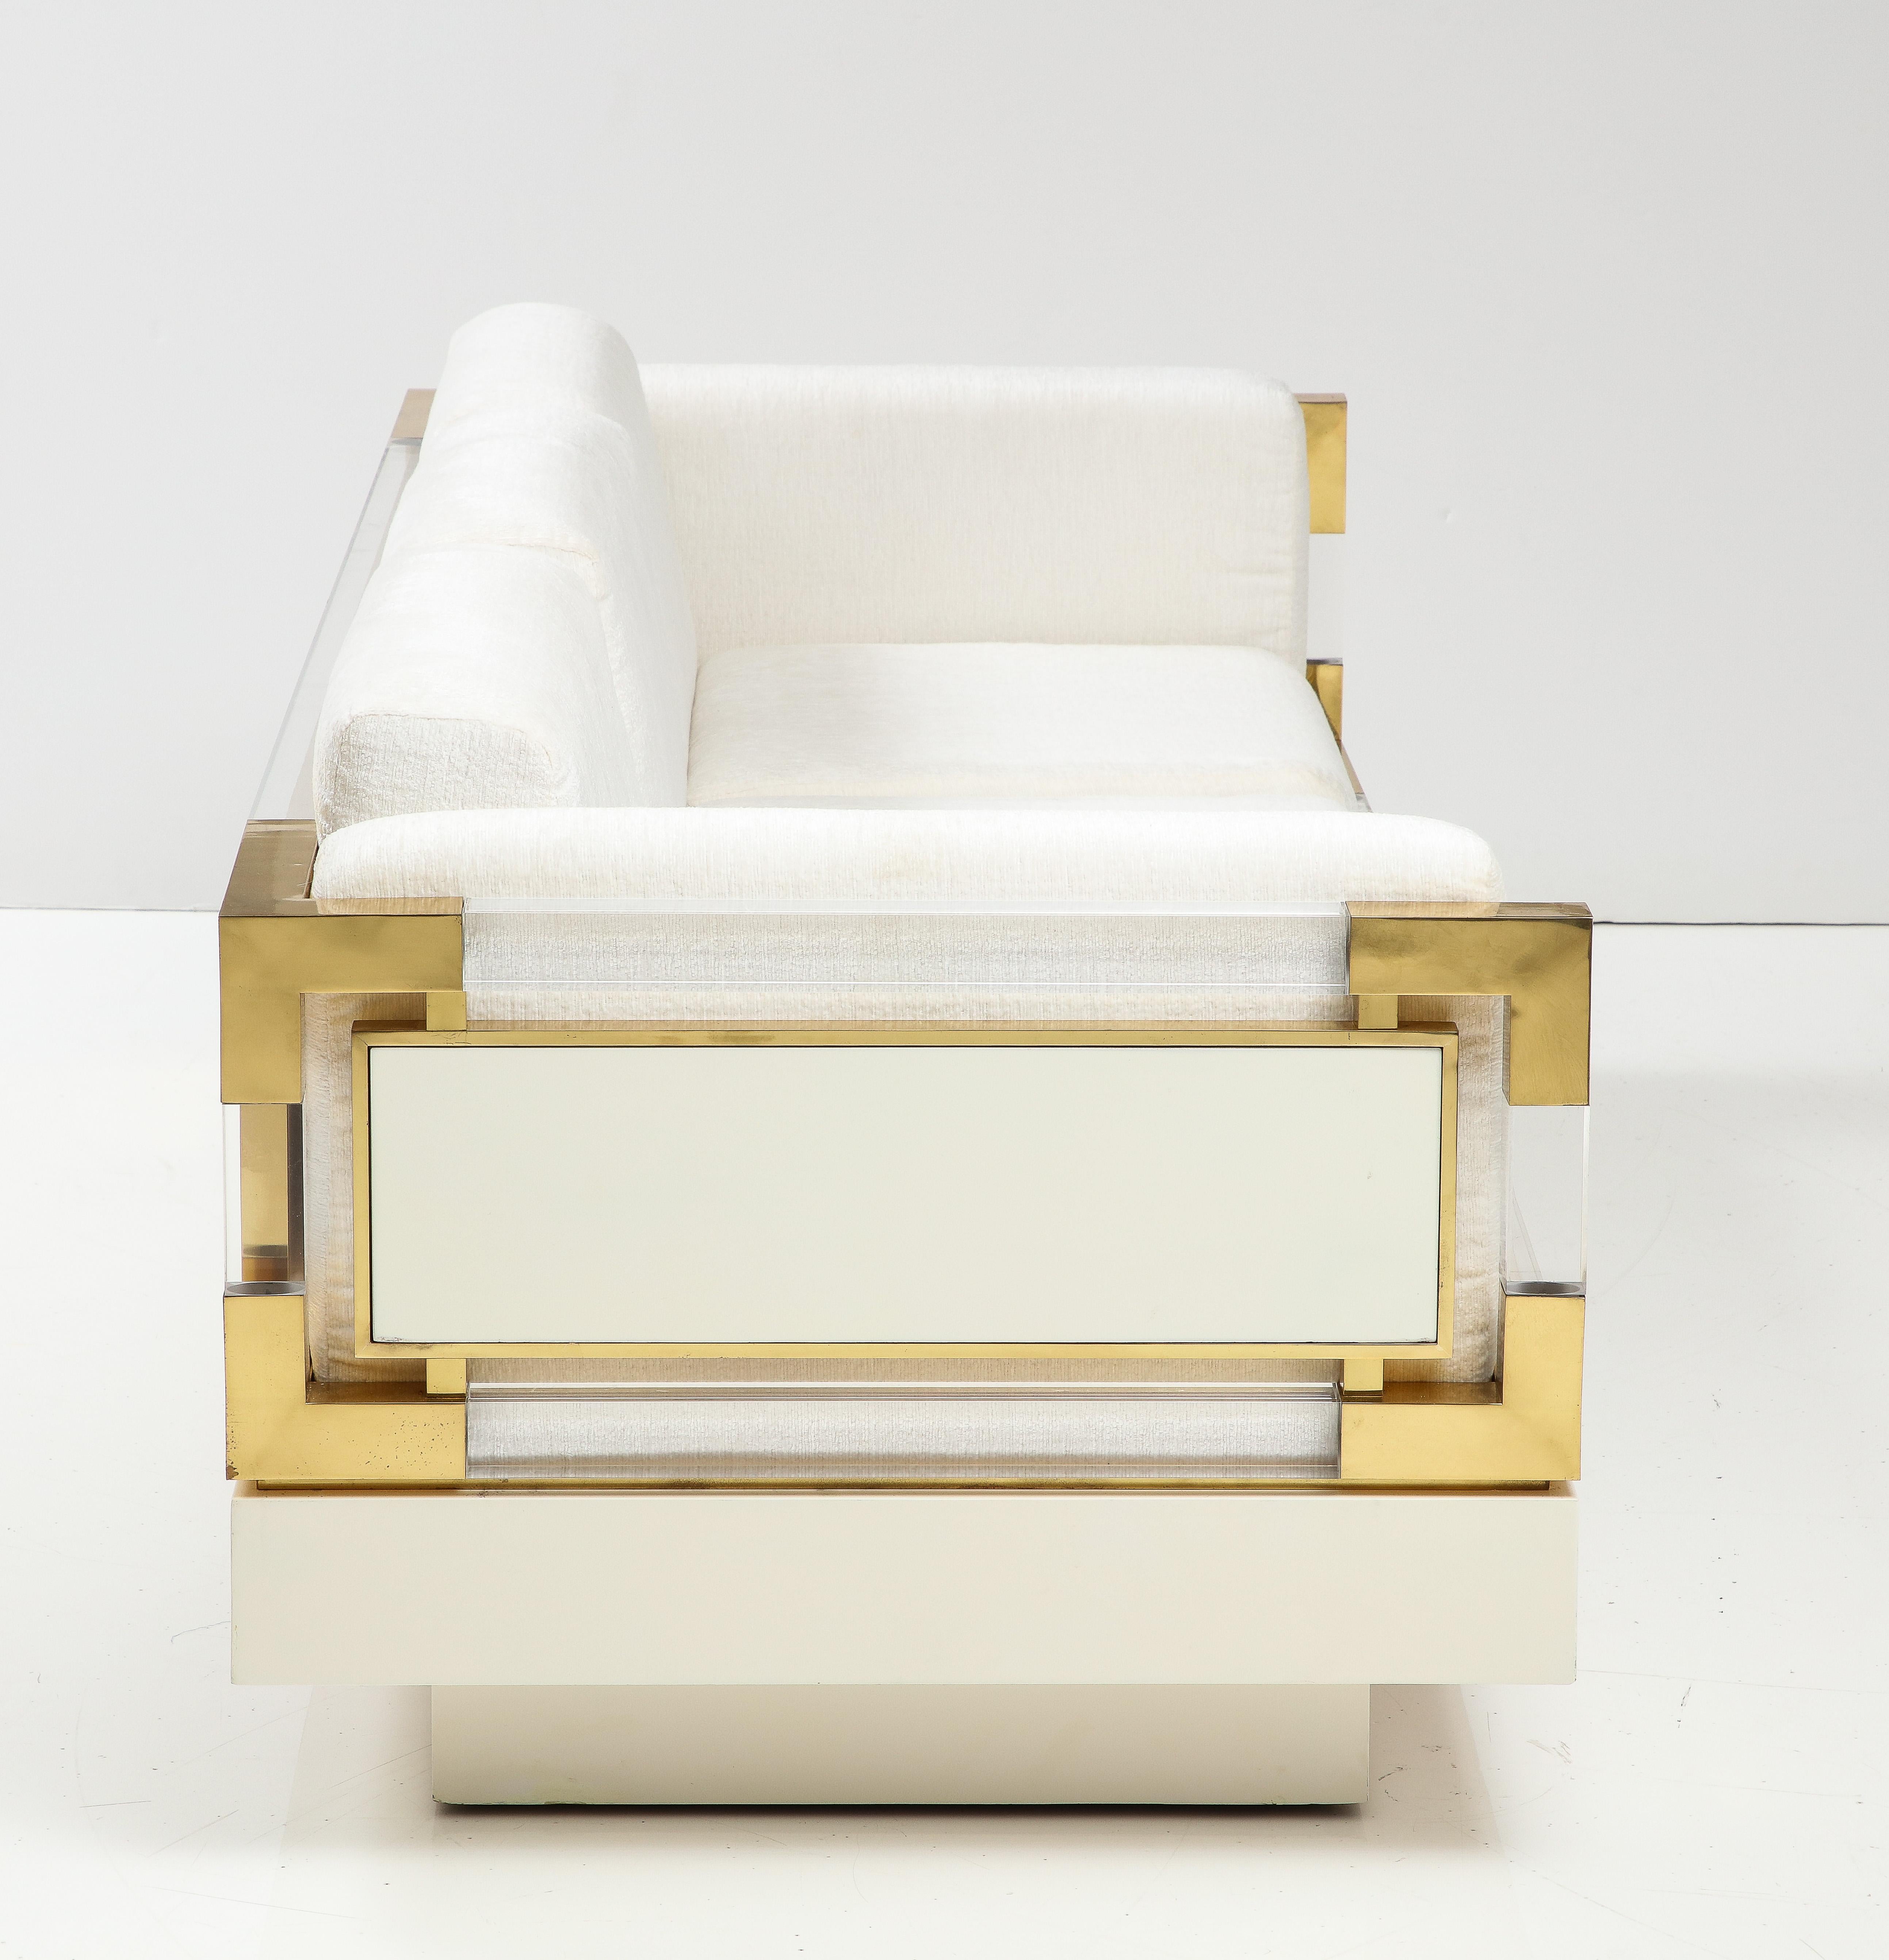 Rare Italian 1980's Lucite and Brass Sofa by Fabian For Sale 1